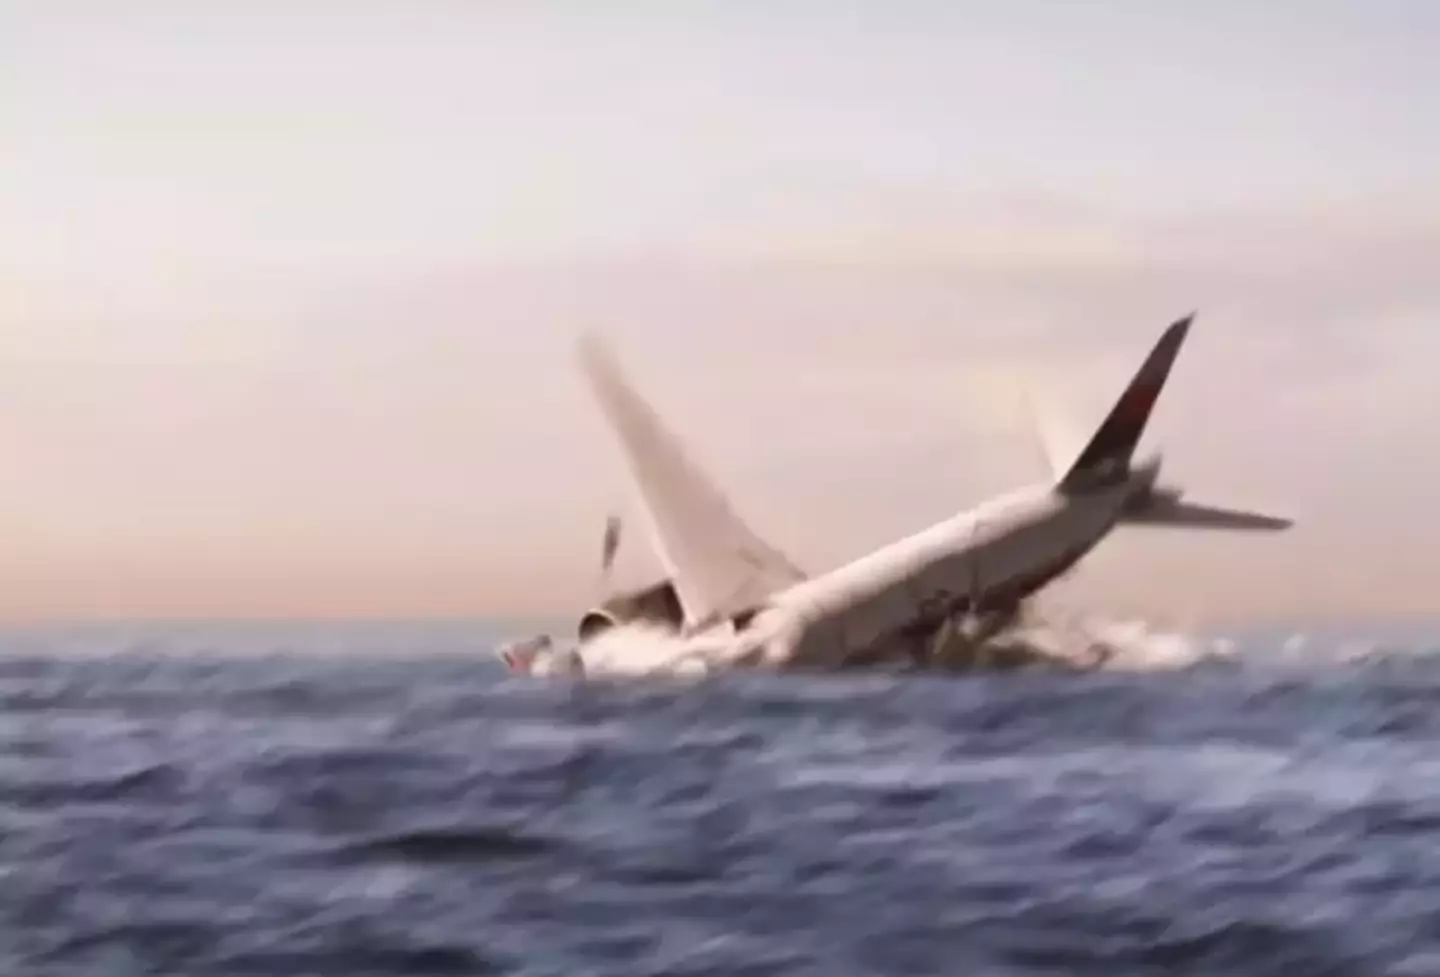 Many simulations have attempted to explain how the crash may have happened.